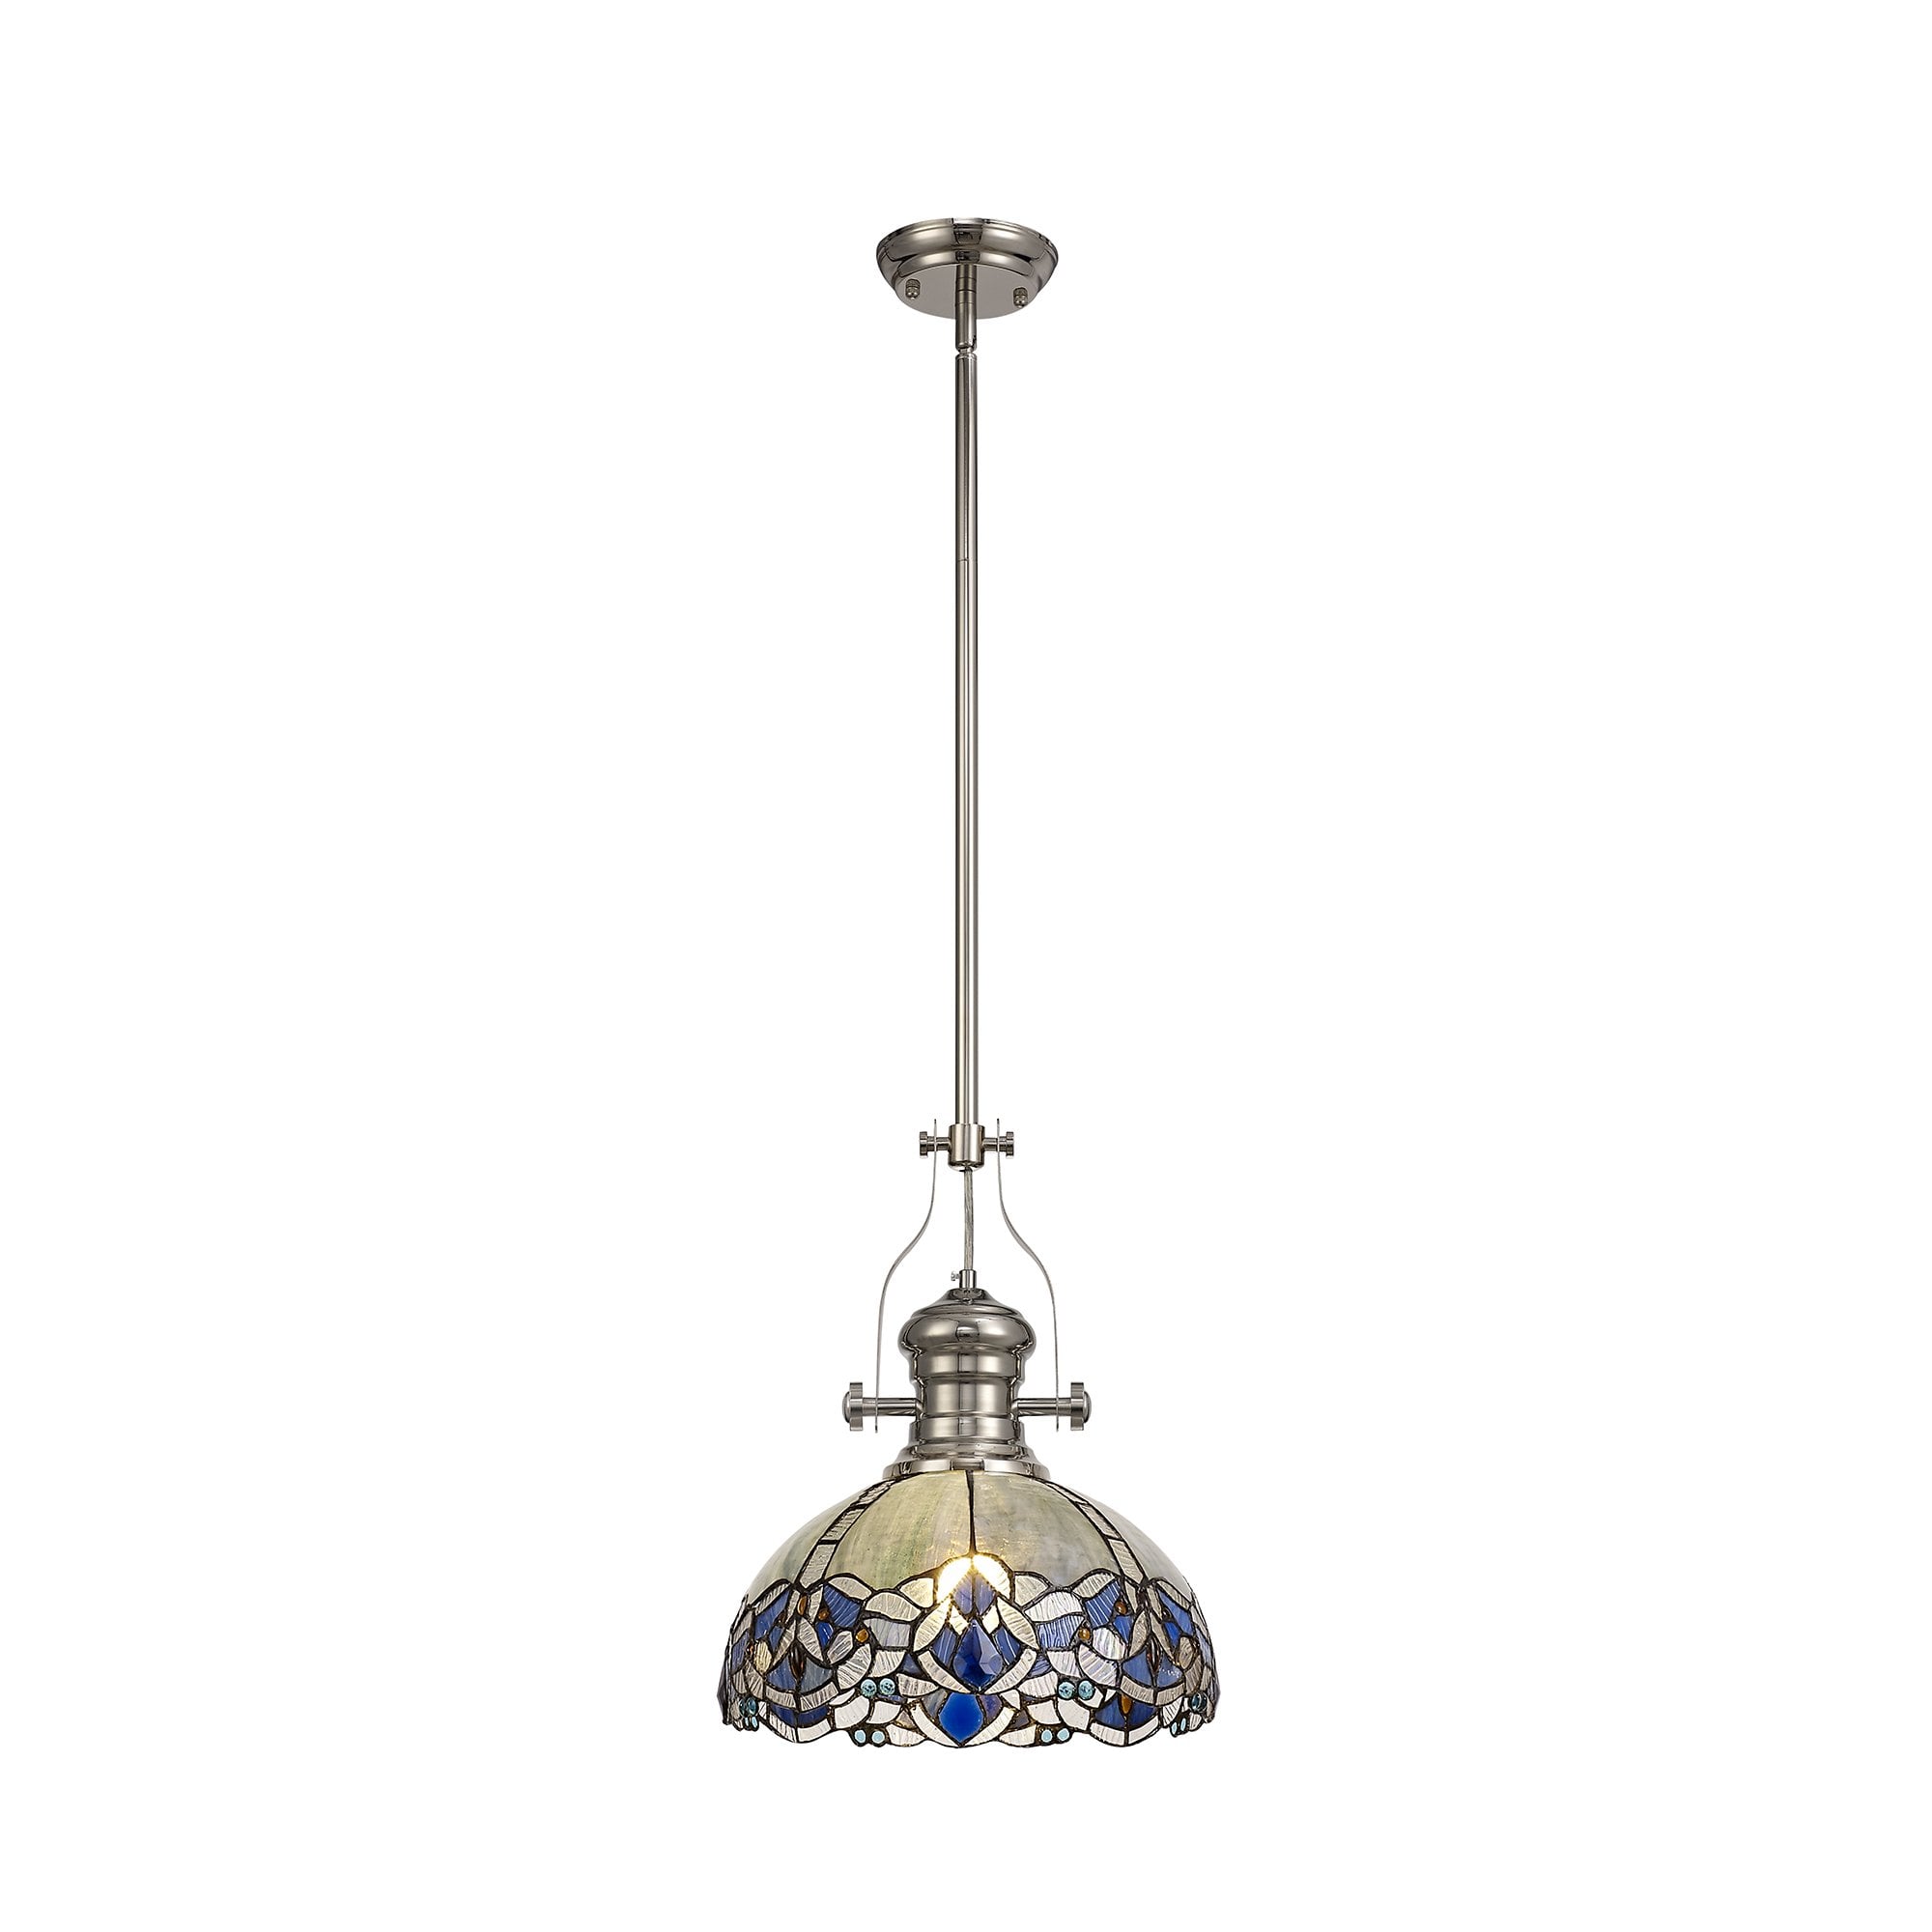 1 Light Telescopic Pendant E27 With 30cm Tiffany Shade, Polished Nickel/Blue/Clear Crystal